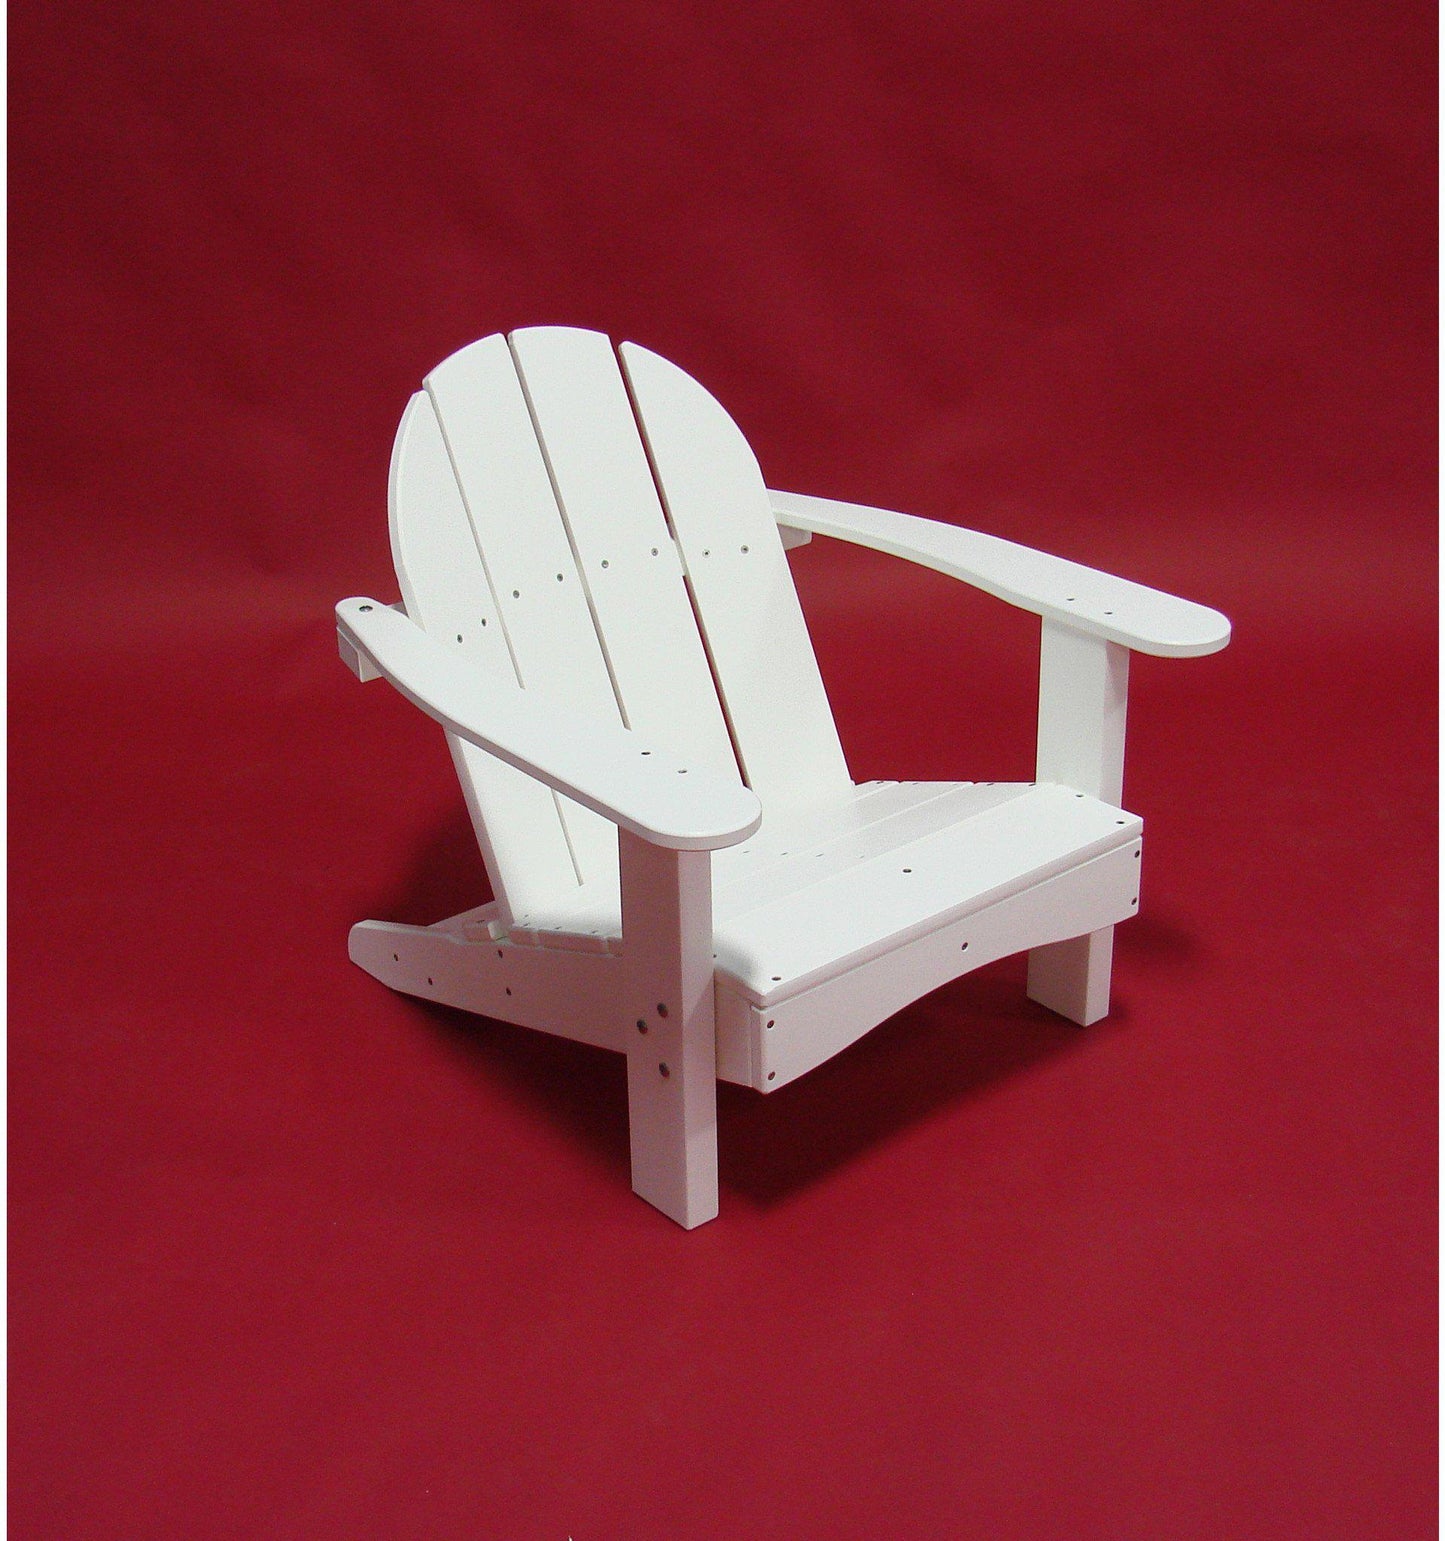 Tailwind Furniture Recycled Plastic Beach Chair - BC 100 - Rocking Furniture